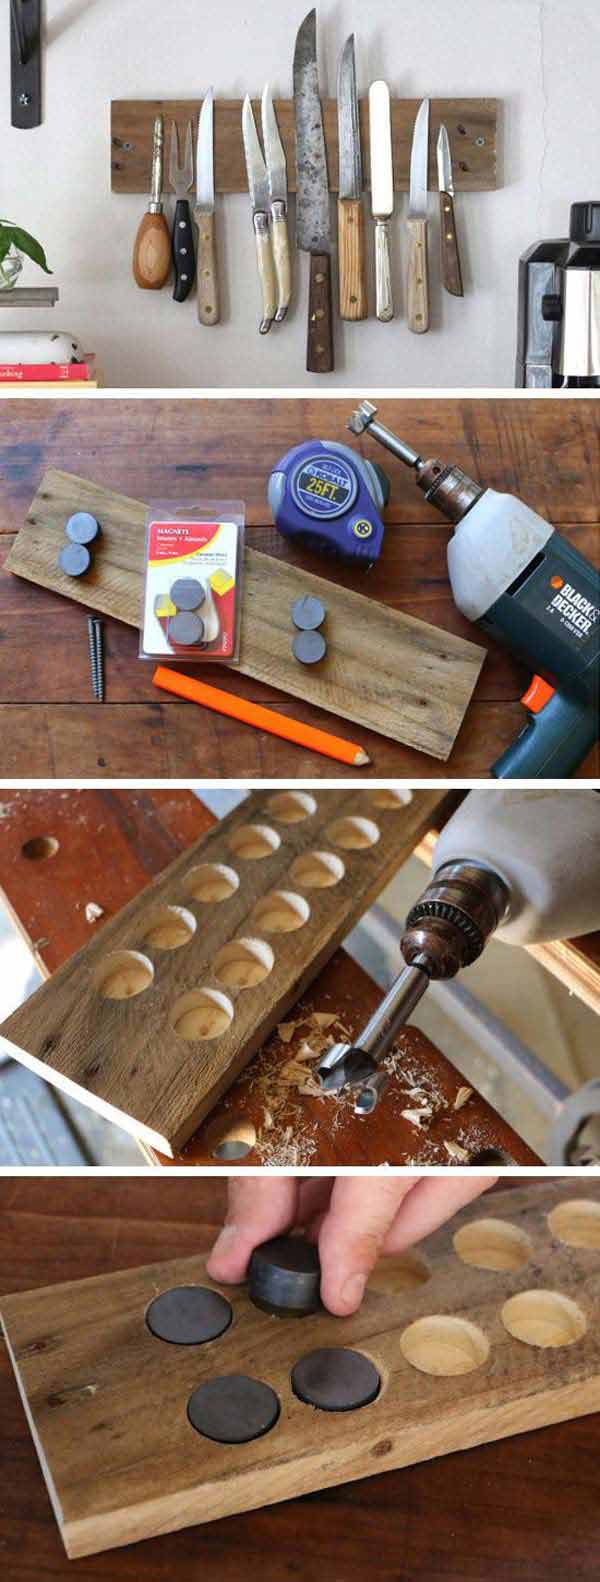 21 Insanely Cool DIY Projects That Will Amaze You ...